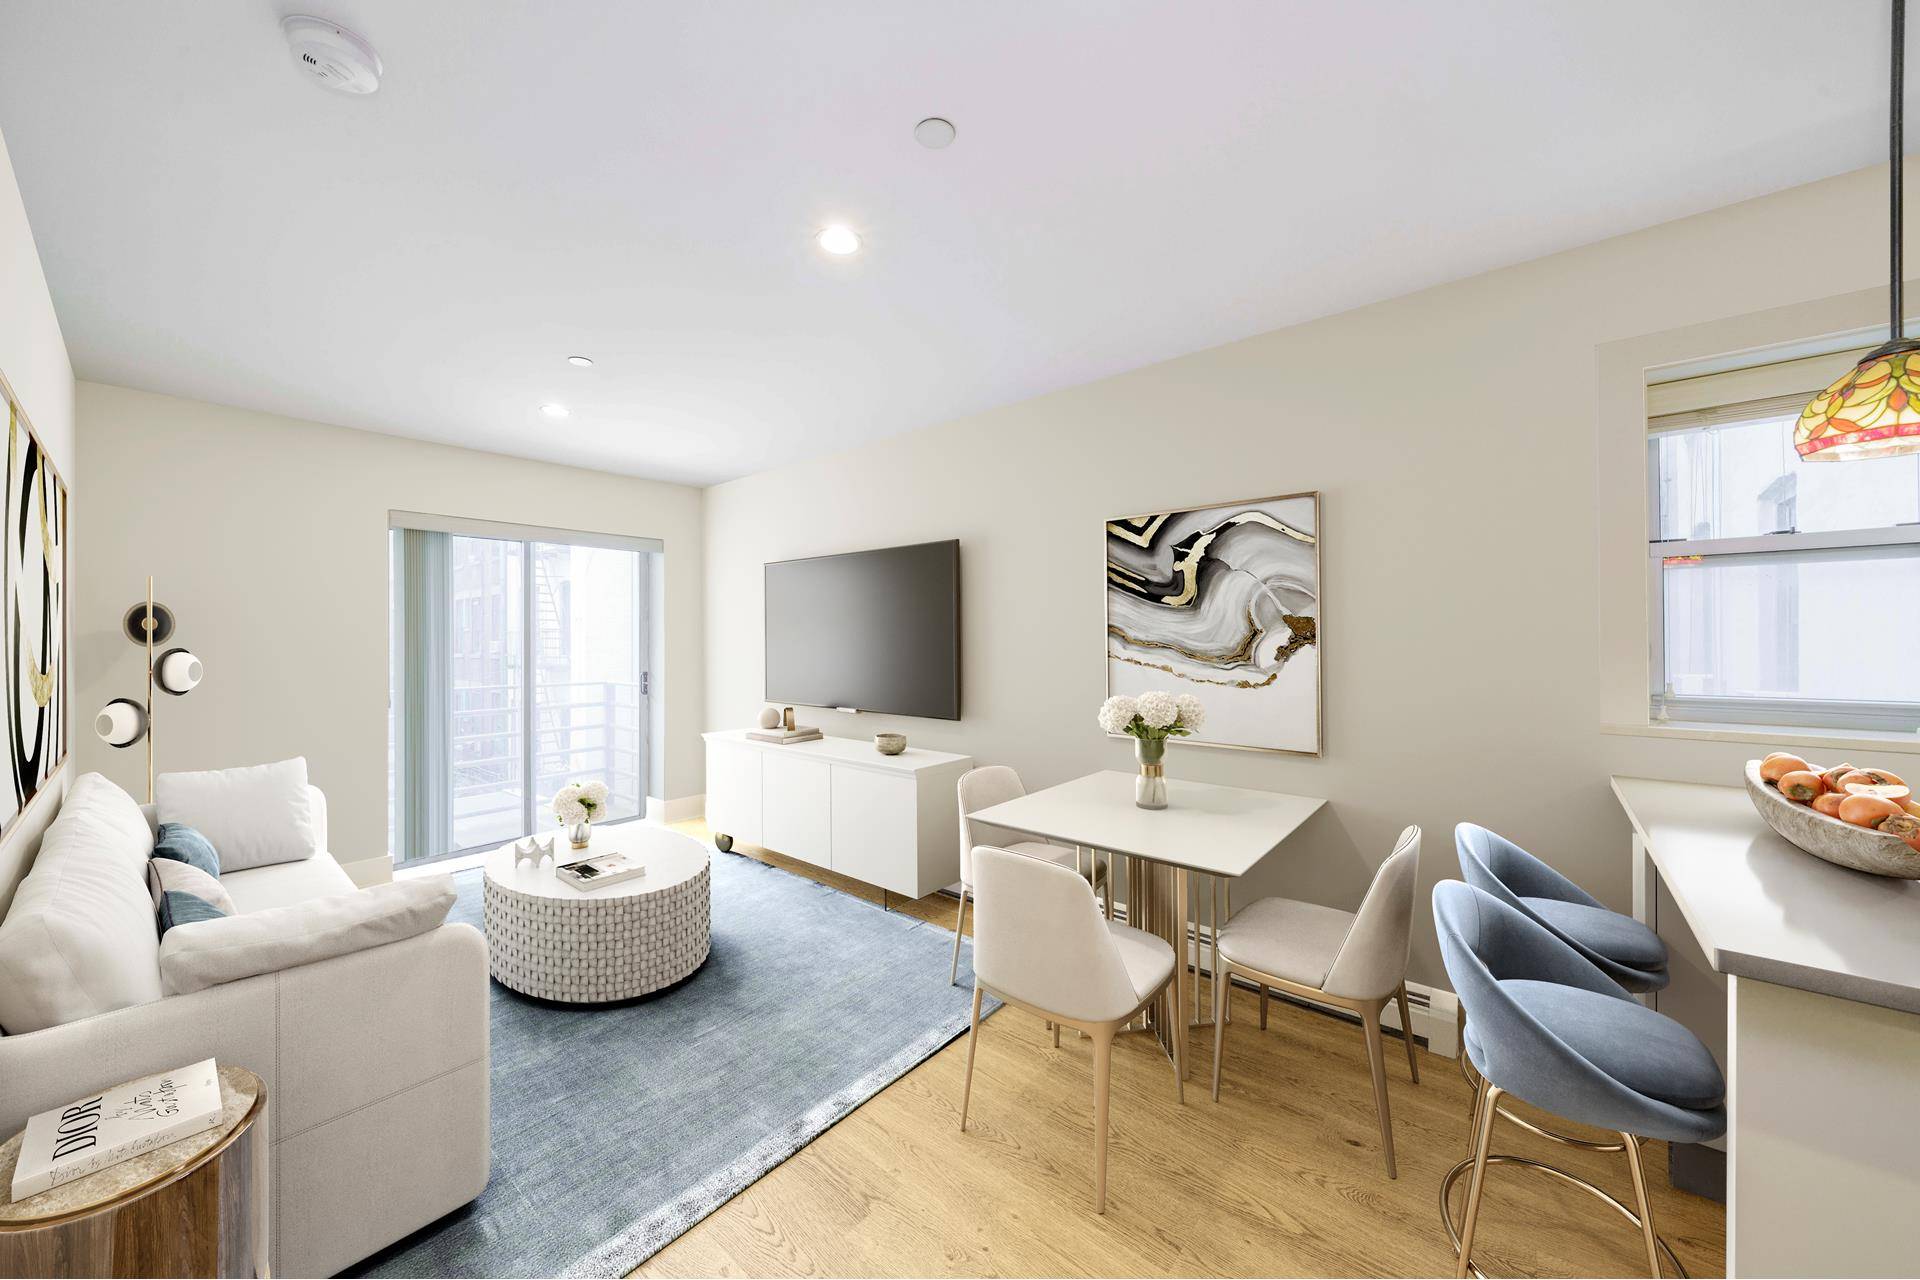 Chic Modern 1 bedroom 1 bath in an elevator Condo building in Little Italy Soho Chinatown.